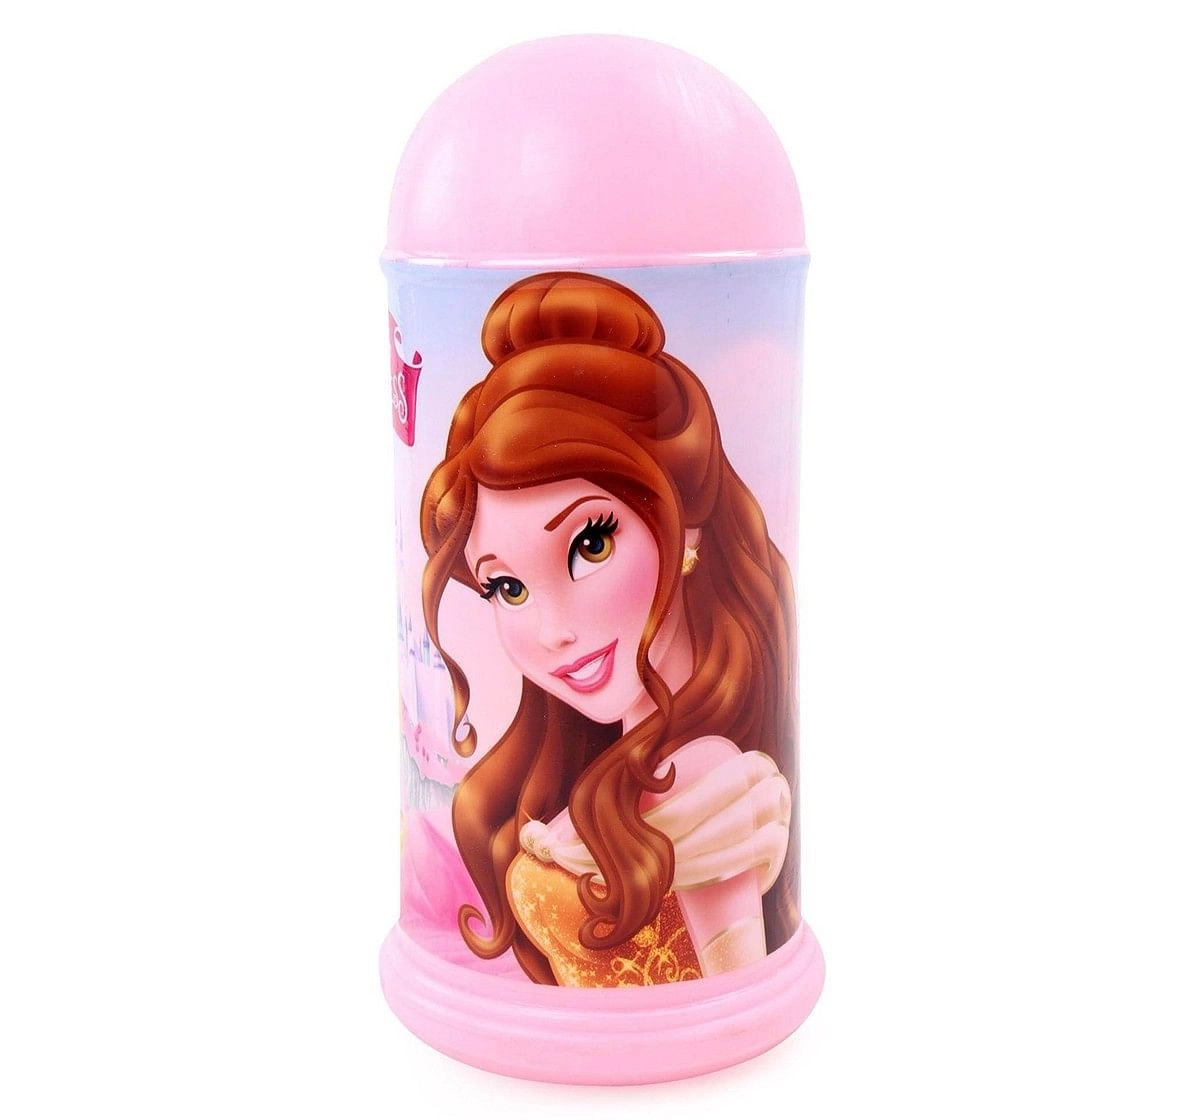 IToys Disney Princess Coin Bank Novelty for Kids Age 4Y+